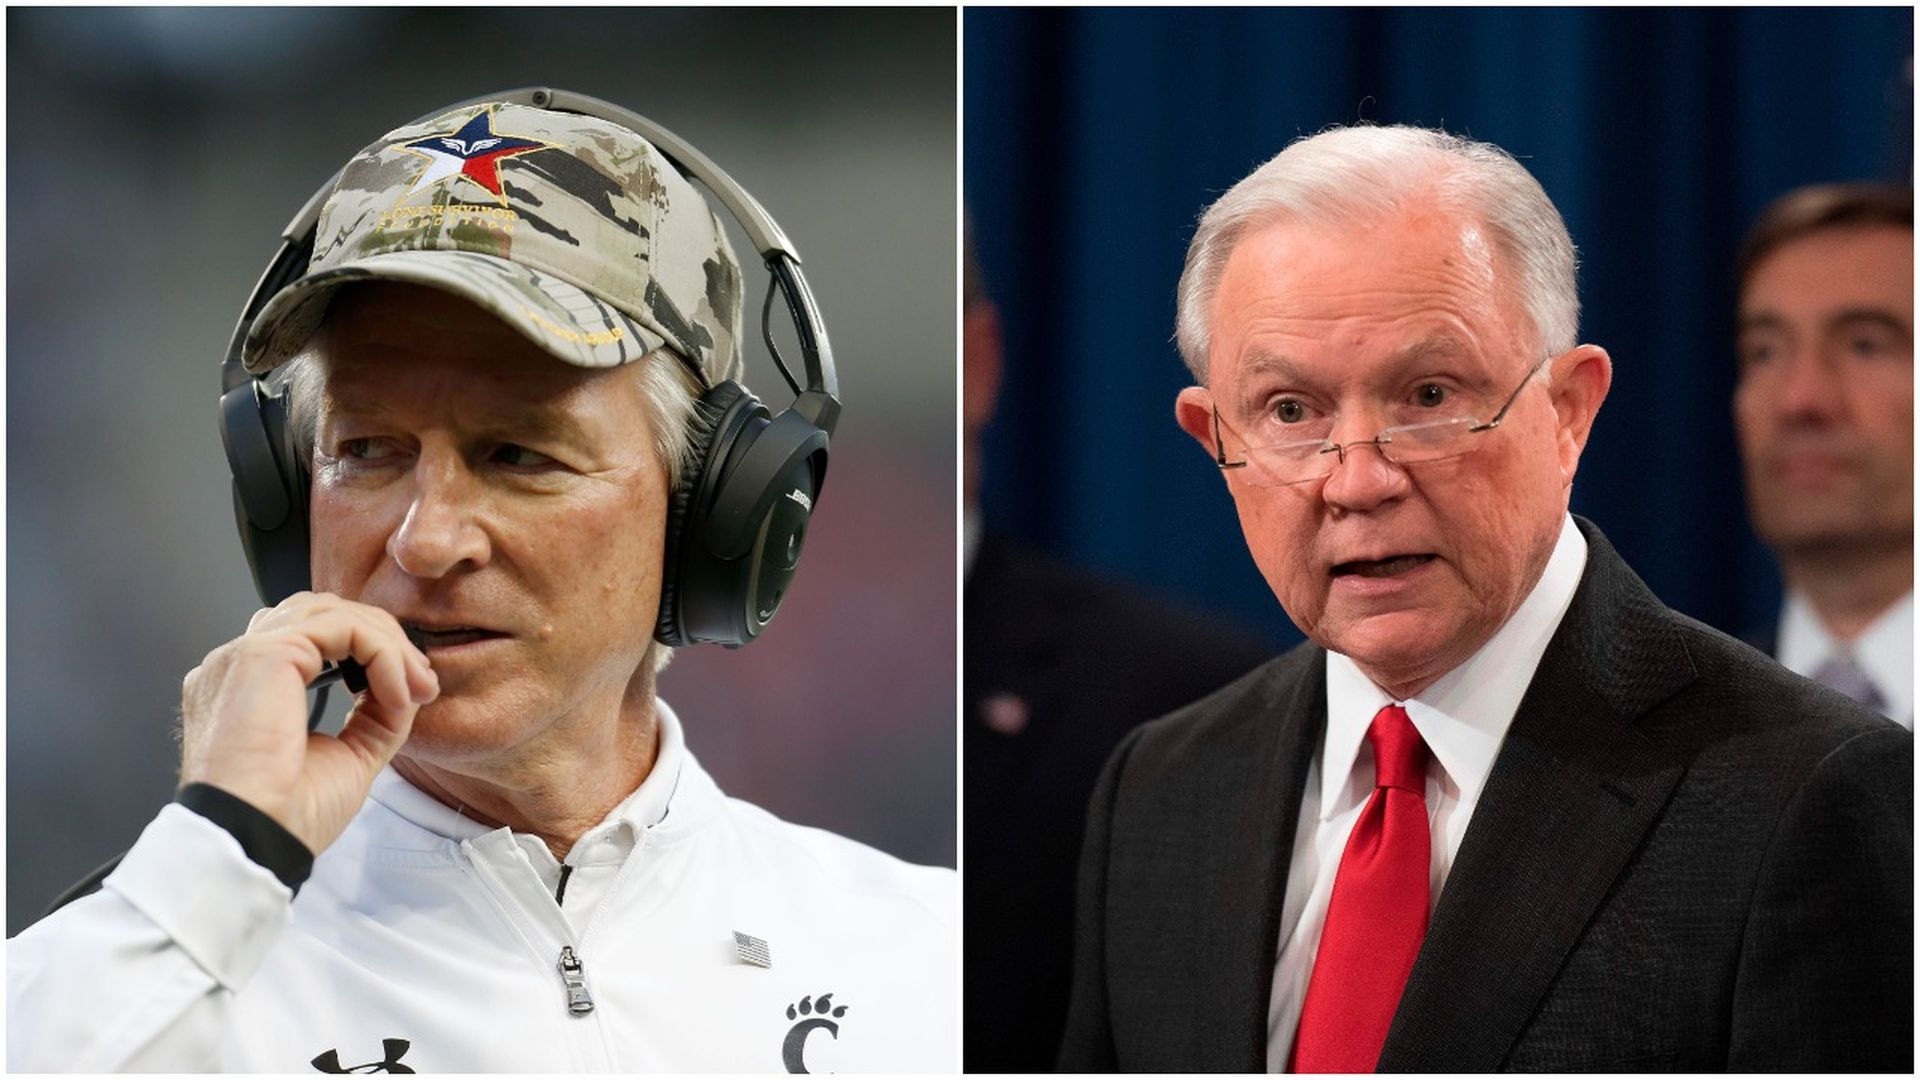 Tommy Tuberville and Jeff Sessions.